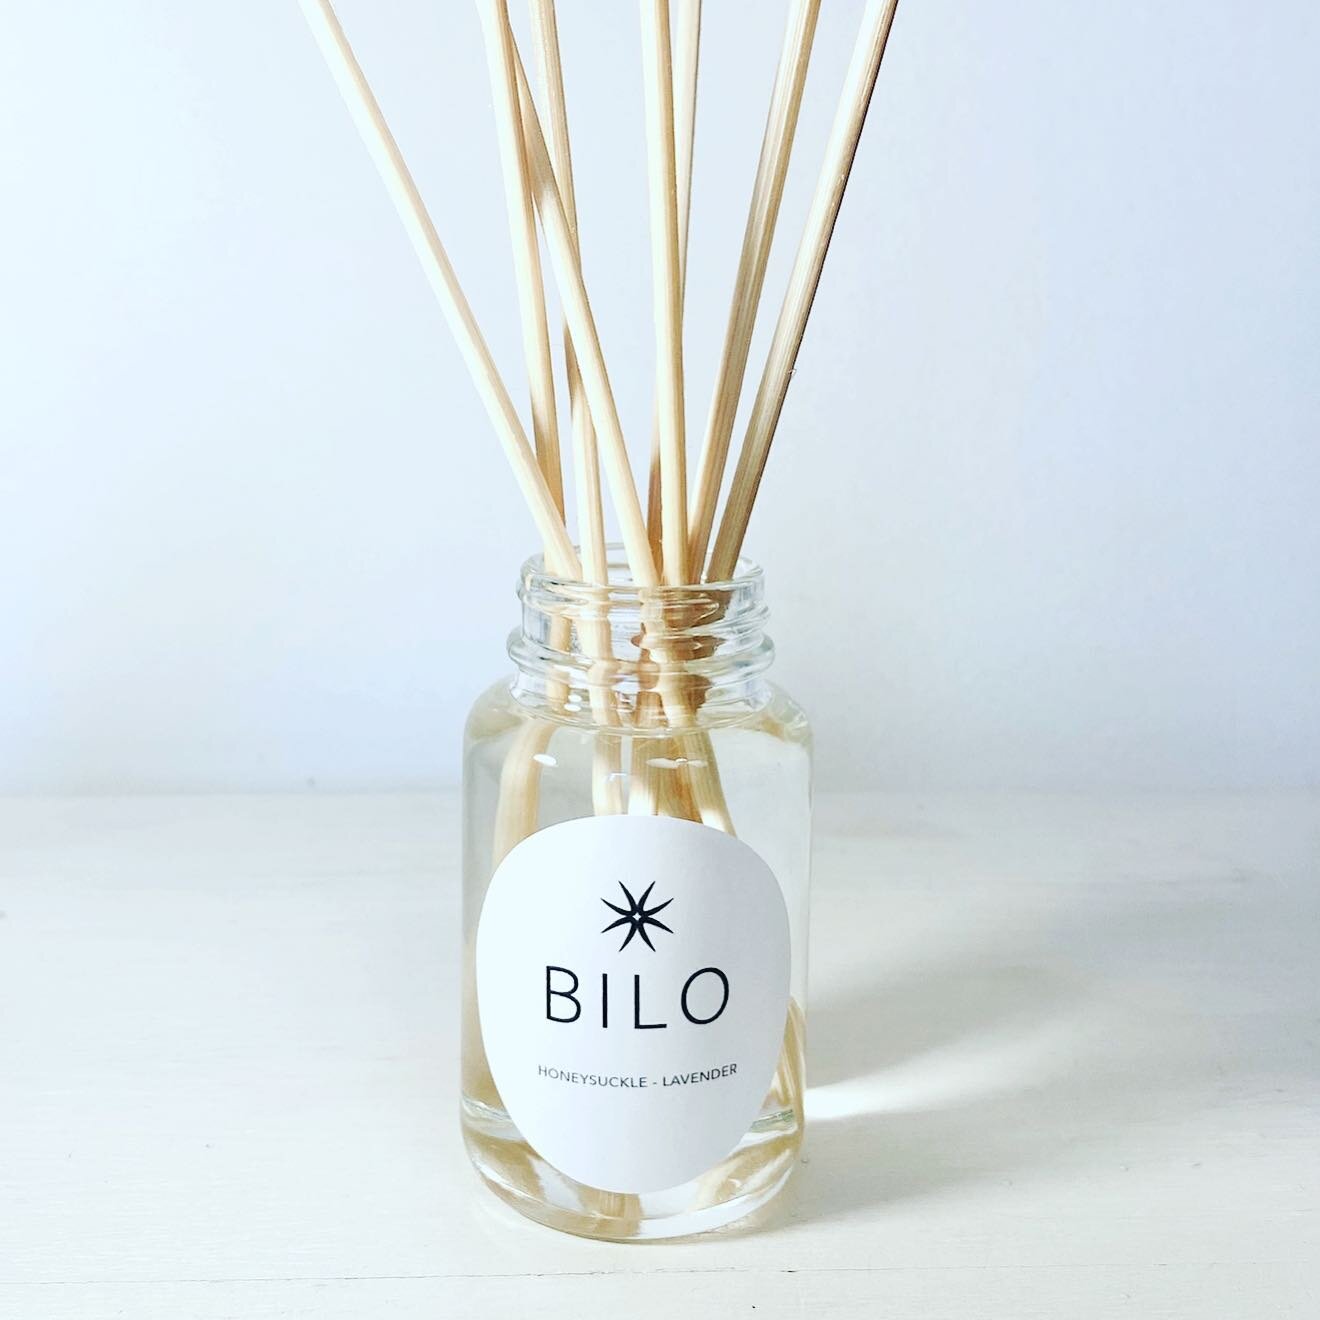 Bilo&rsquo;s 100ml natural reed diffuser made with an eco friendly diffuser base and essential oils.  Bursting with fragrance, our diffusers last up to 6 months.  A contemporary clear glass bottle, aluminium screw top lid, 10 natural reeds, all packa